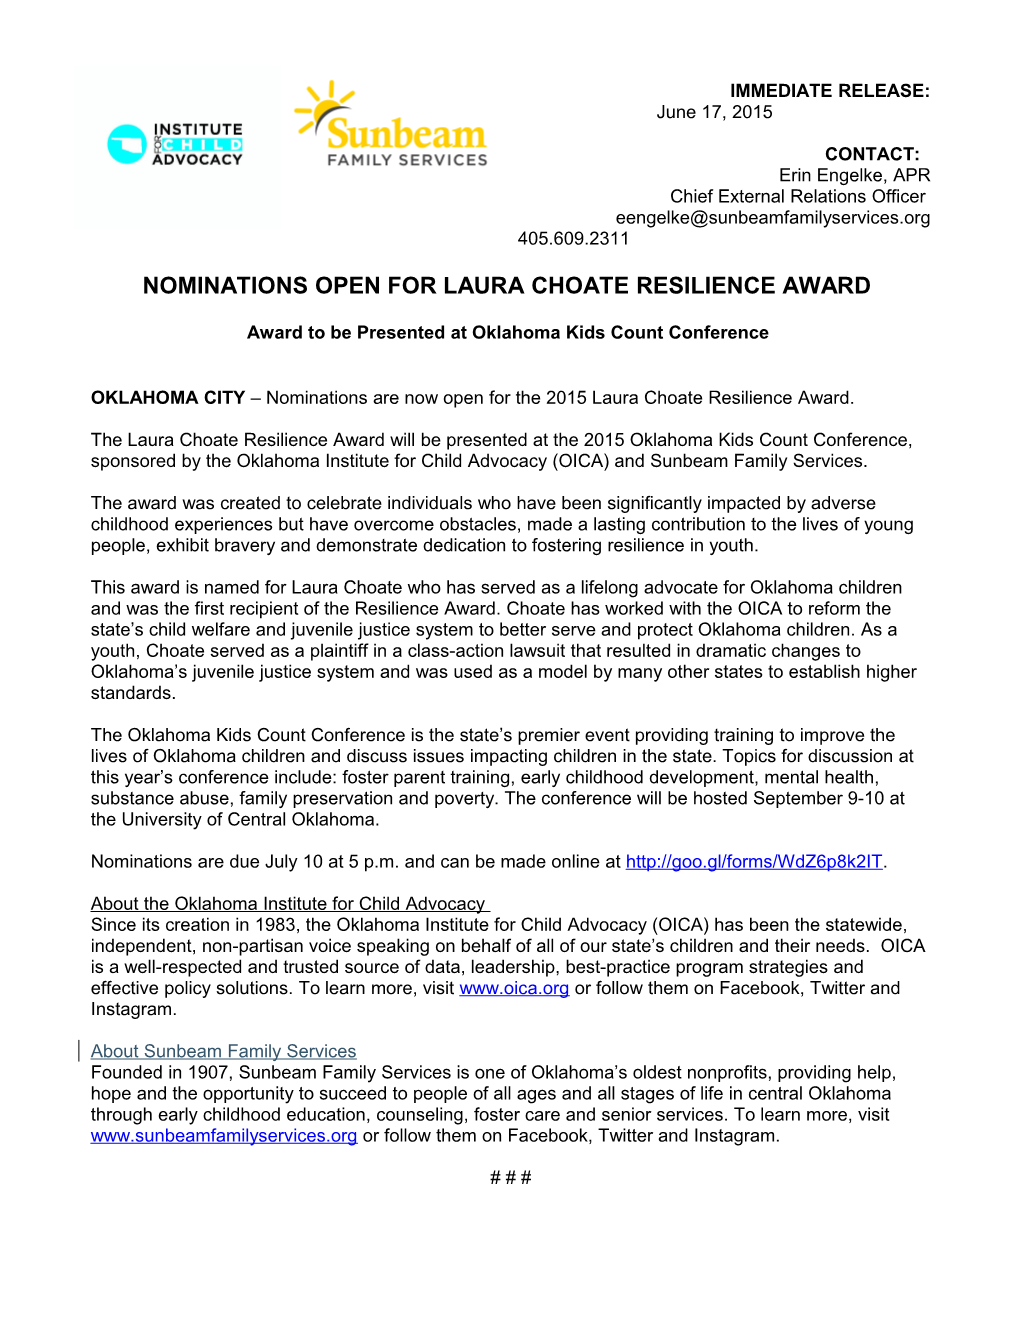 Nominations Open for Laura Choate Resilience Award